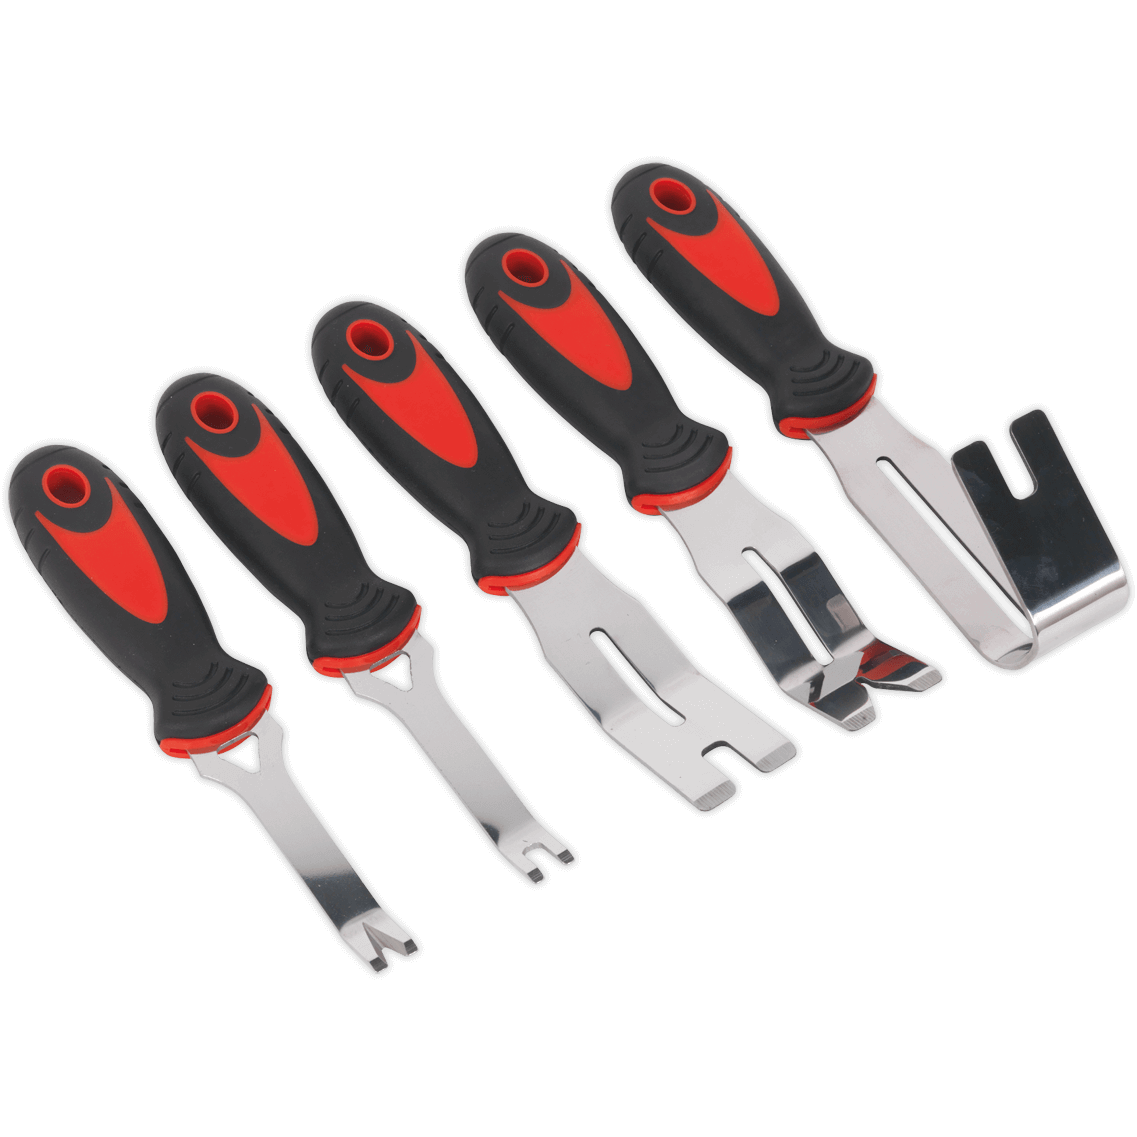 Sealey 5 Piece Door Panel and Trim Clip Removal Tool Kit